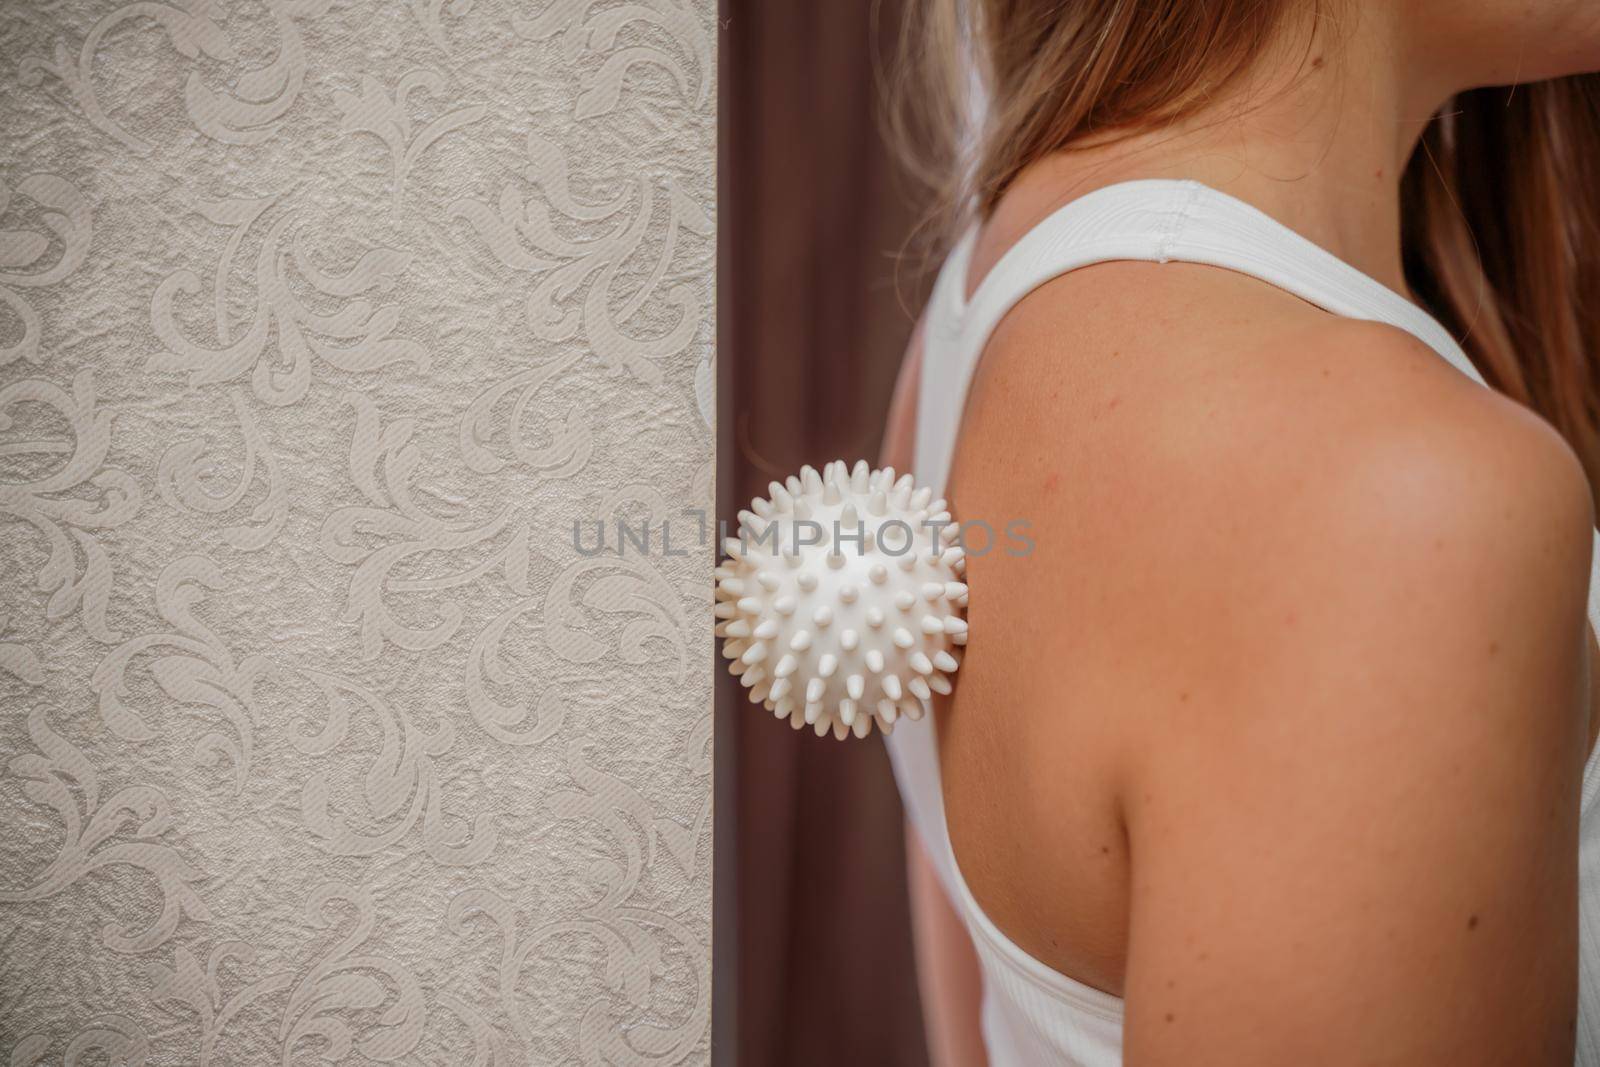 Athletic slim caucasian woman doing thigh self-massage with a massage ball indoors. Self-isolating massage.